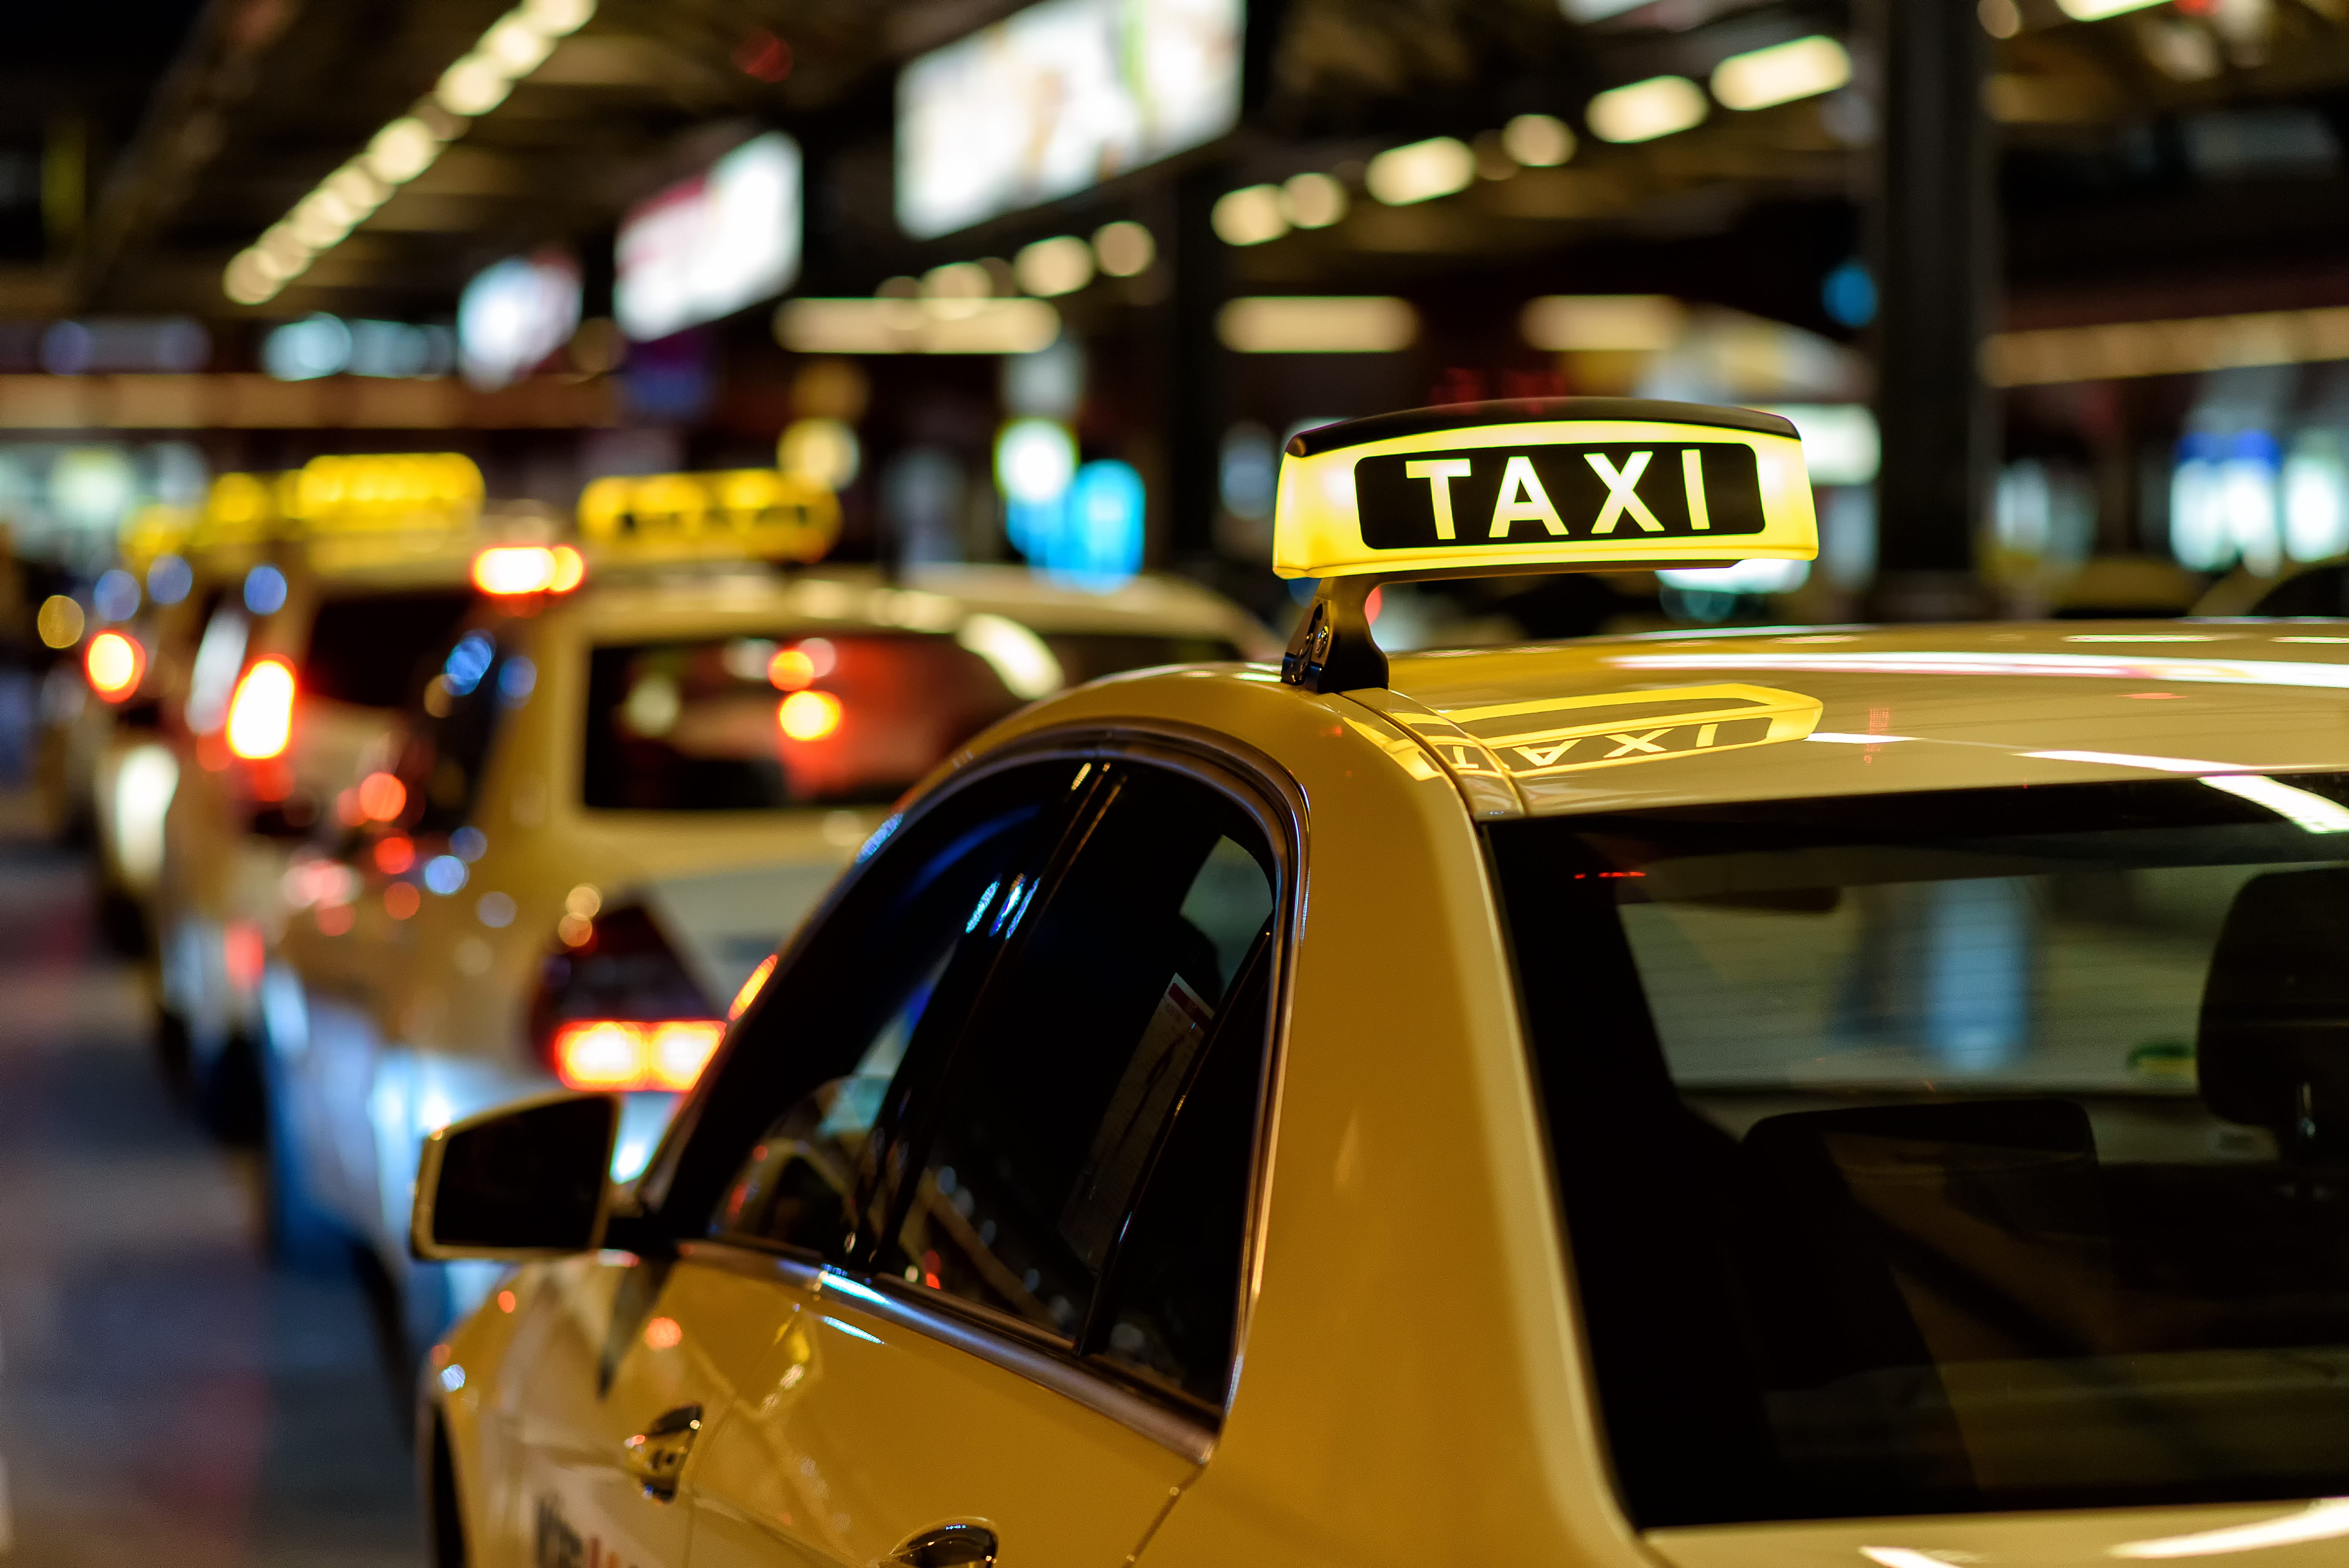 Taxi cars. | Source: Shutterstock